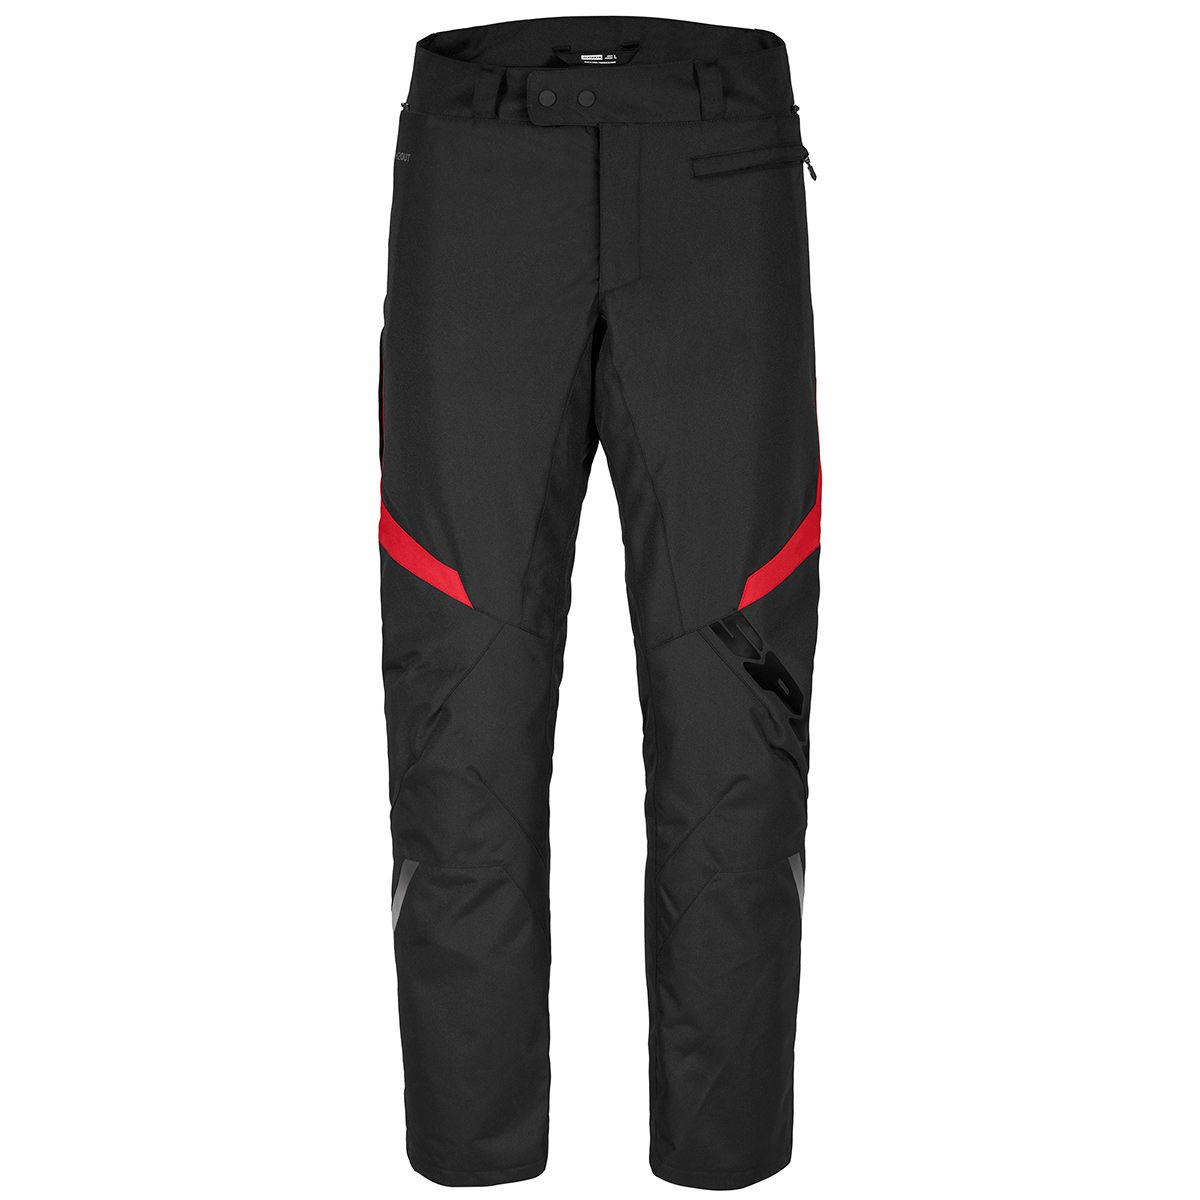 Image of Spidi Sportmaster Pants Black Red Size 4XL ID 8030161478259